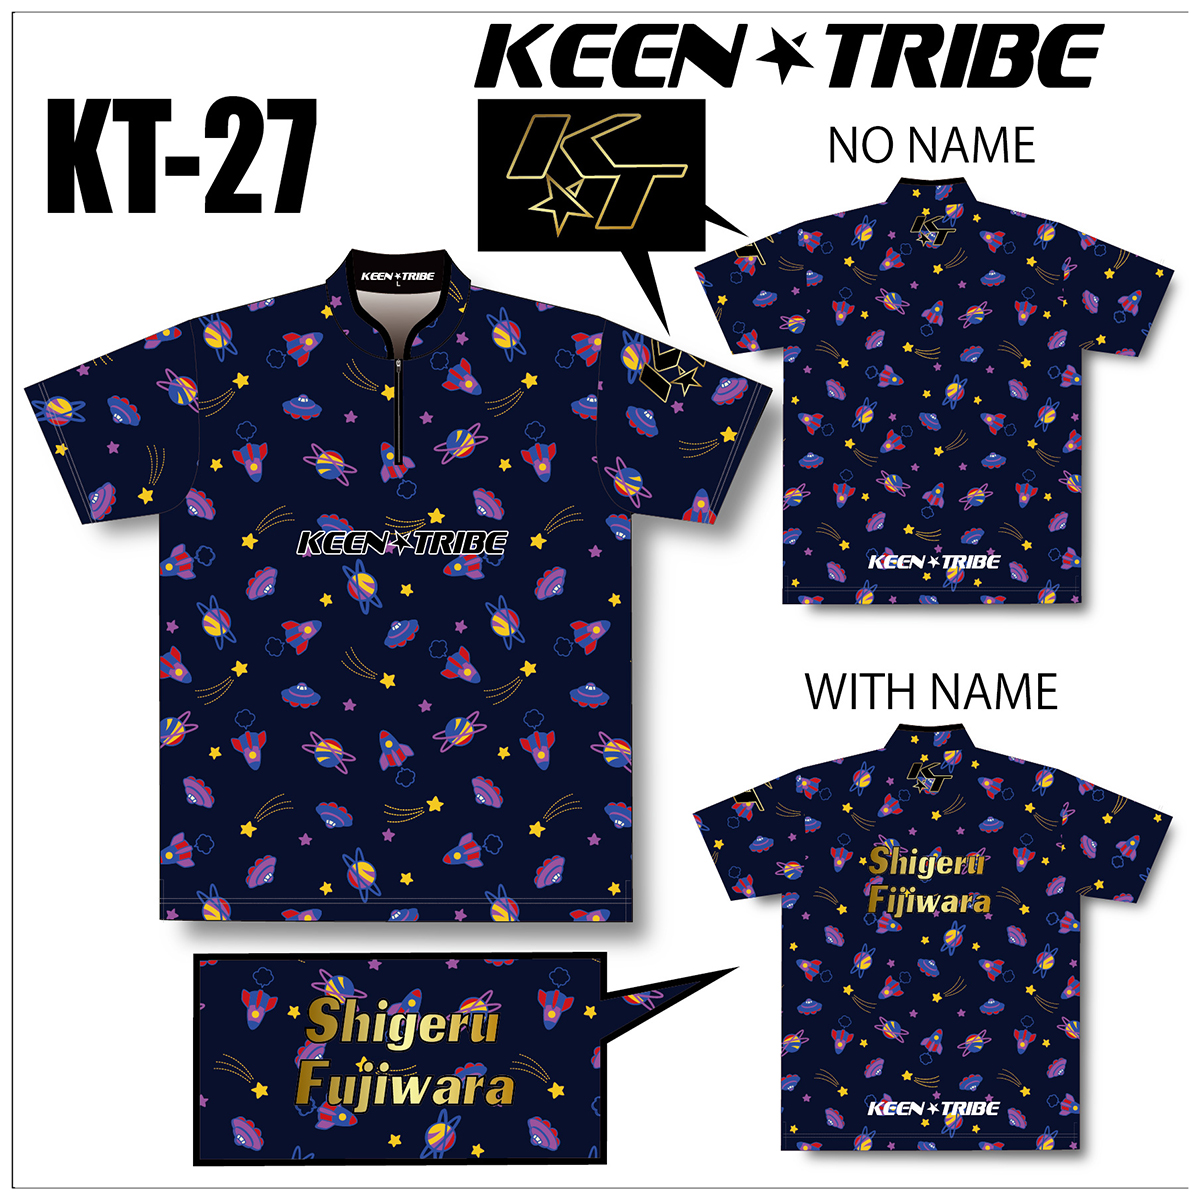 KEEN ★ TRIBE　KT-27(受注生産)